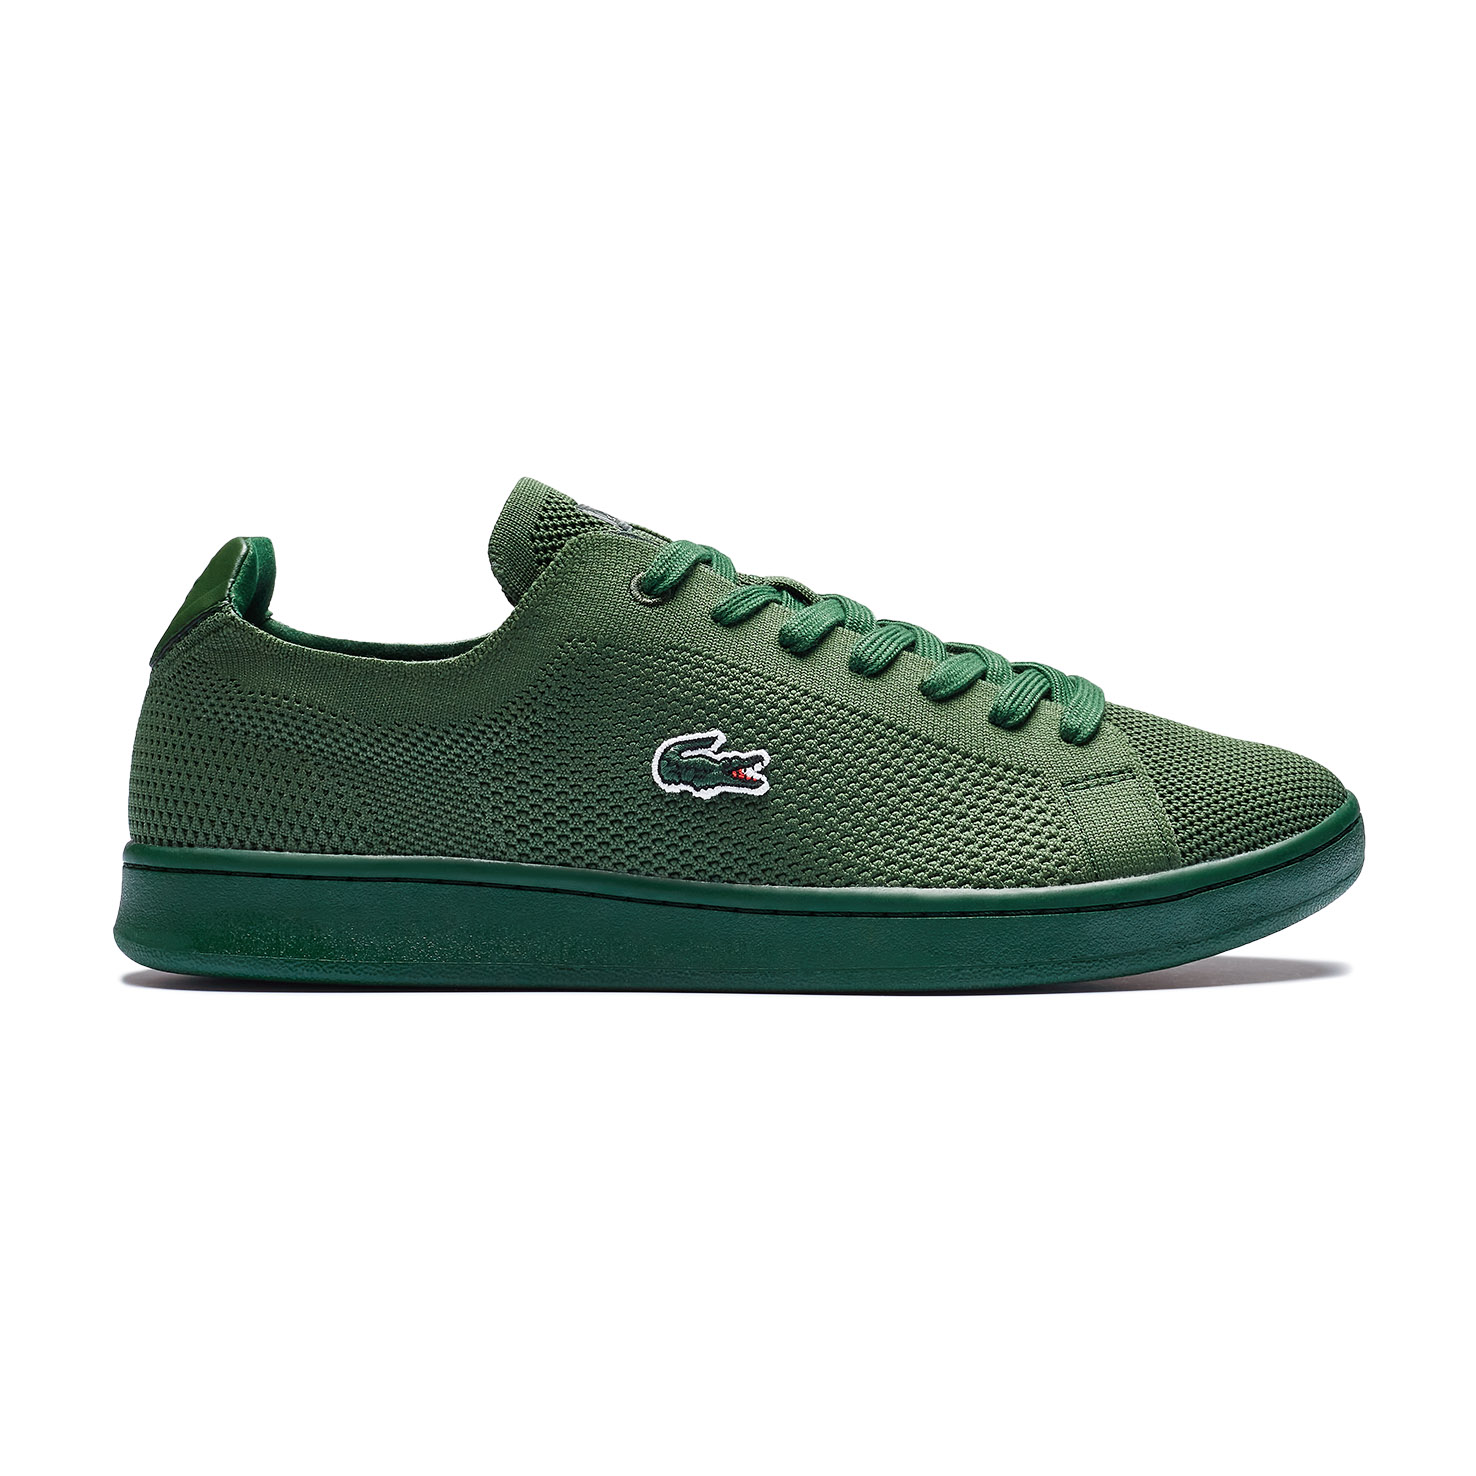 CARNABY PIQUEE 123 1 SMA LACOSTE зеленого цвета